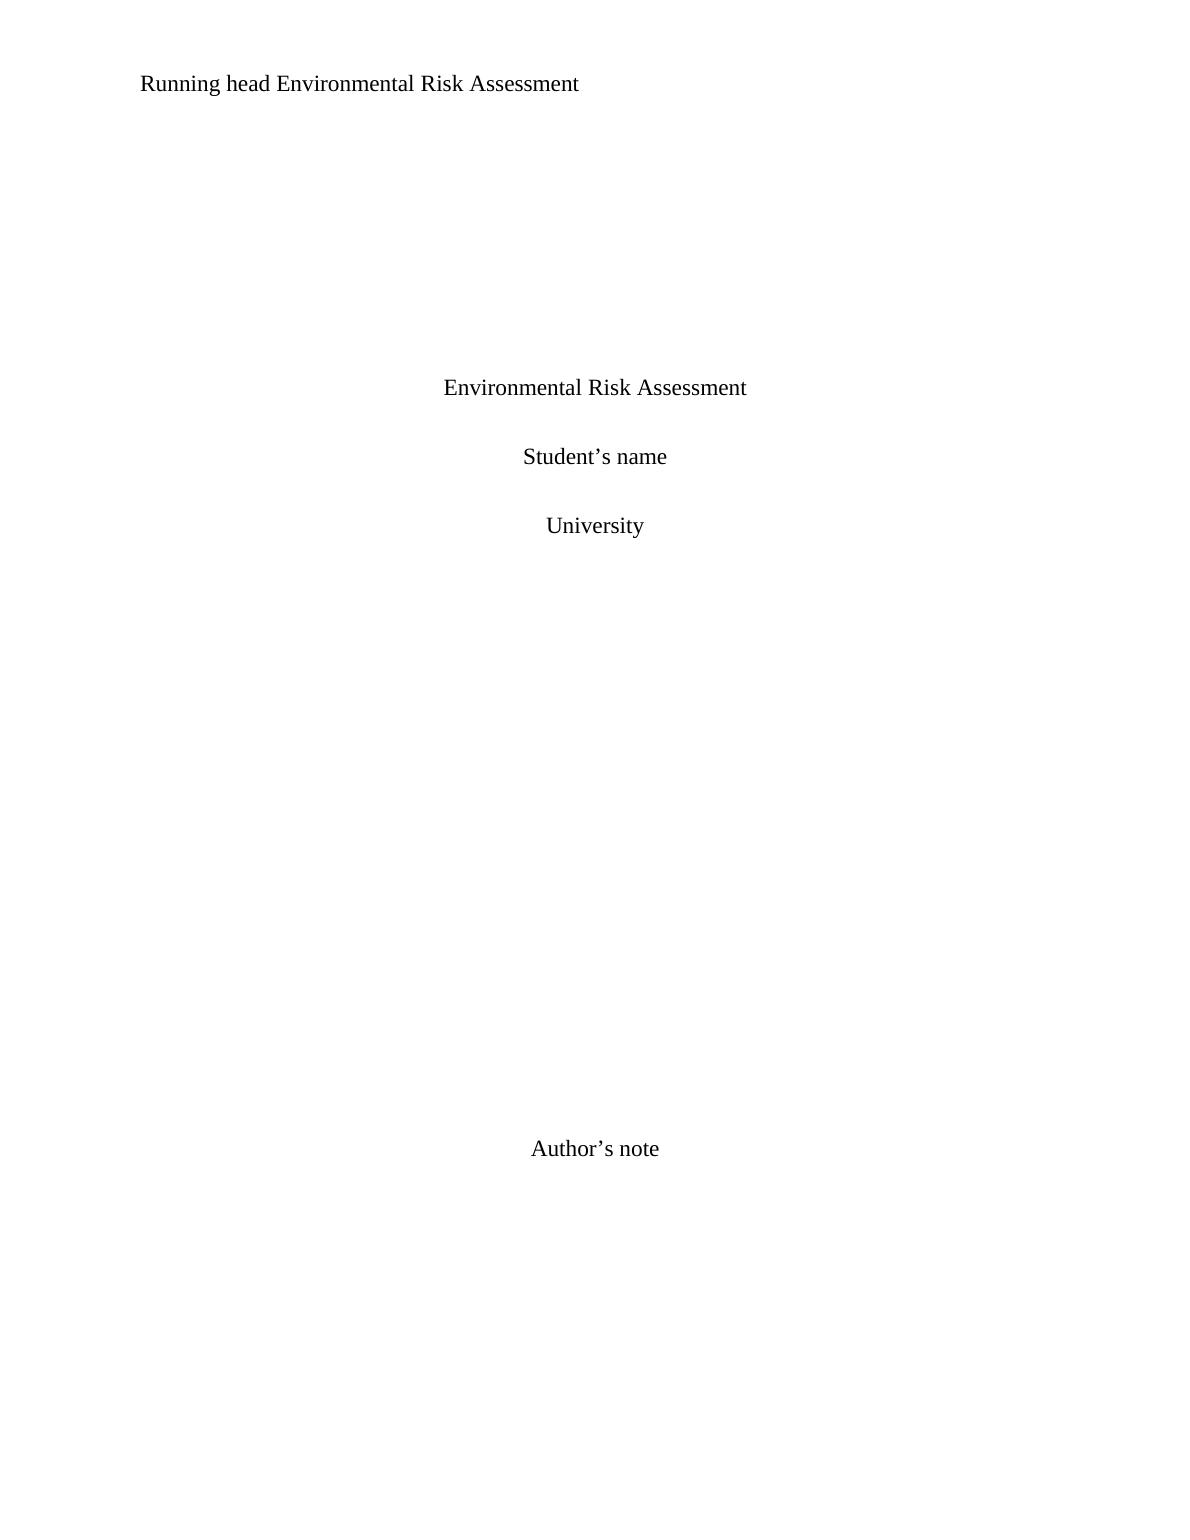 Environmental Risk Assessment : Polluted drinking water_1